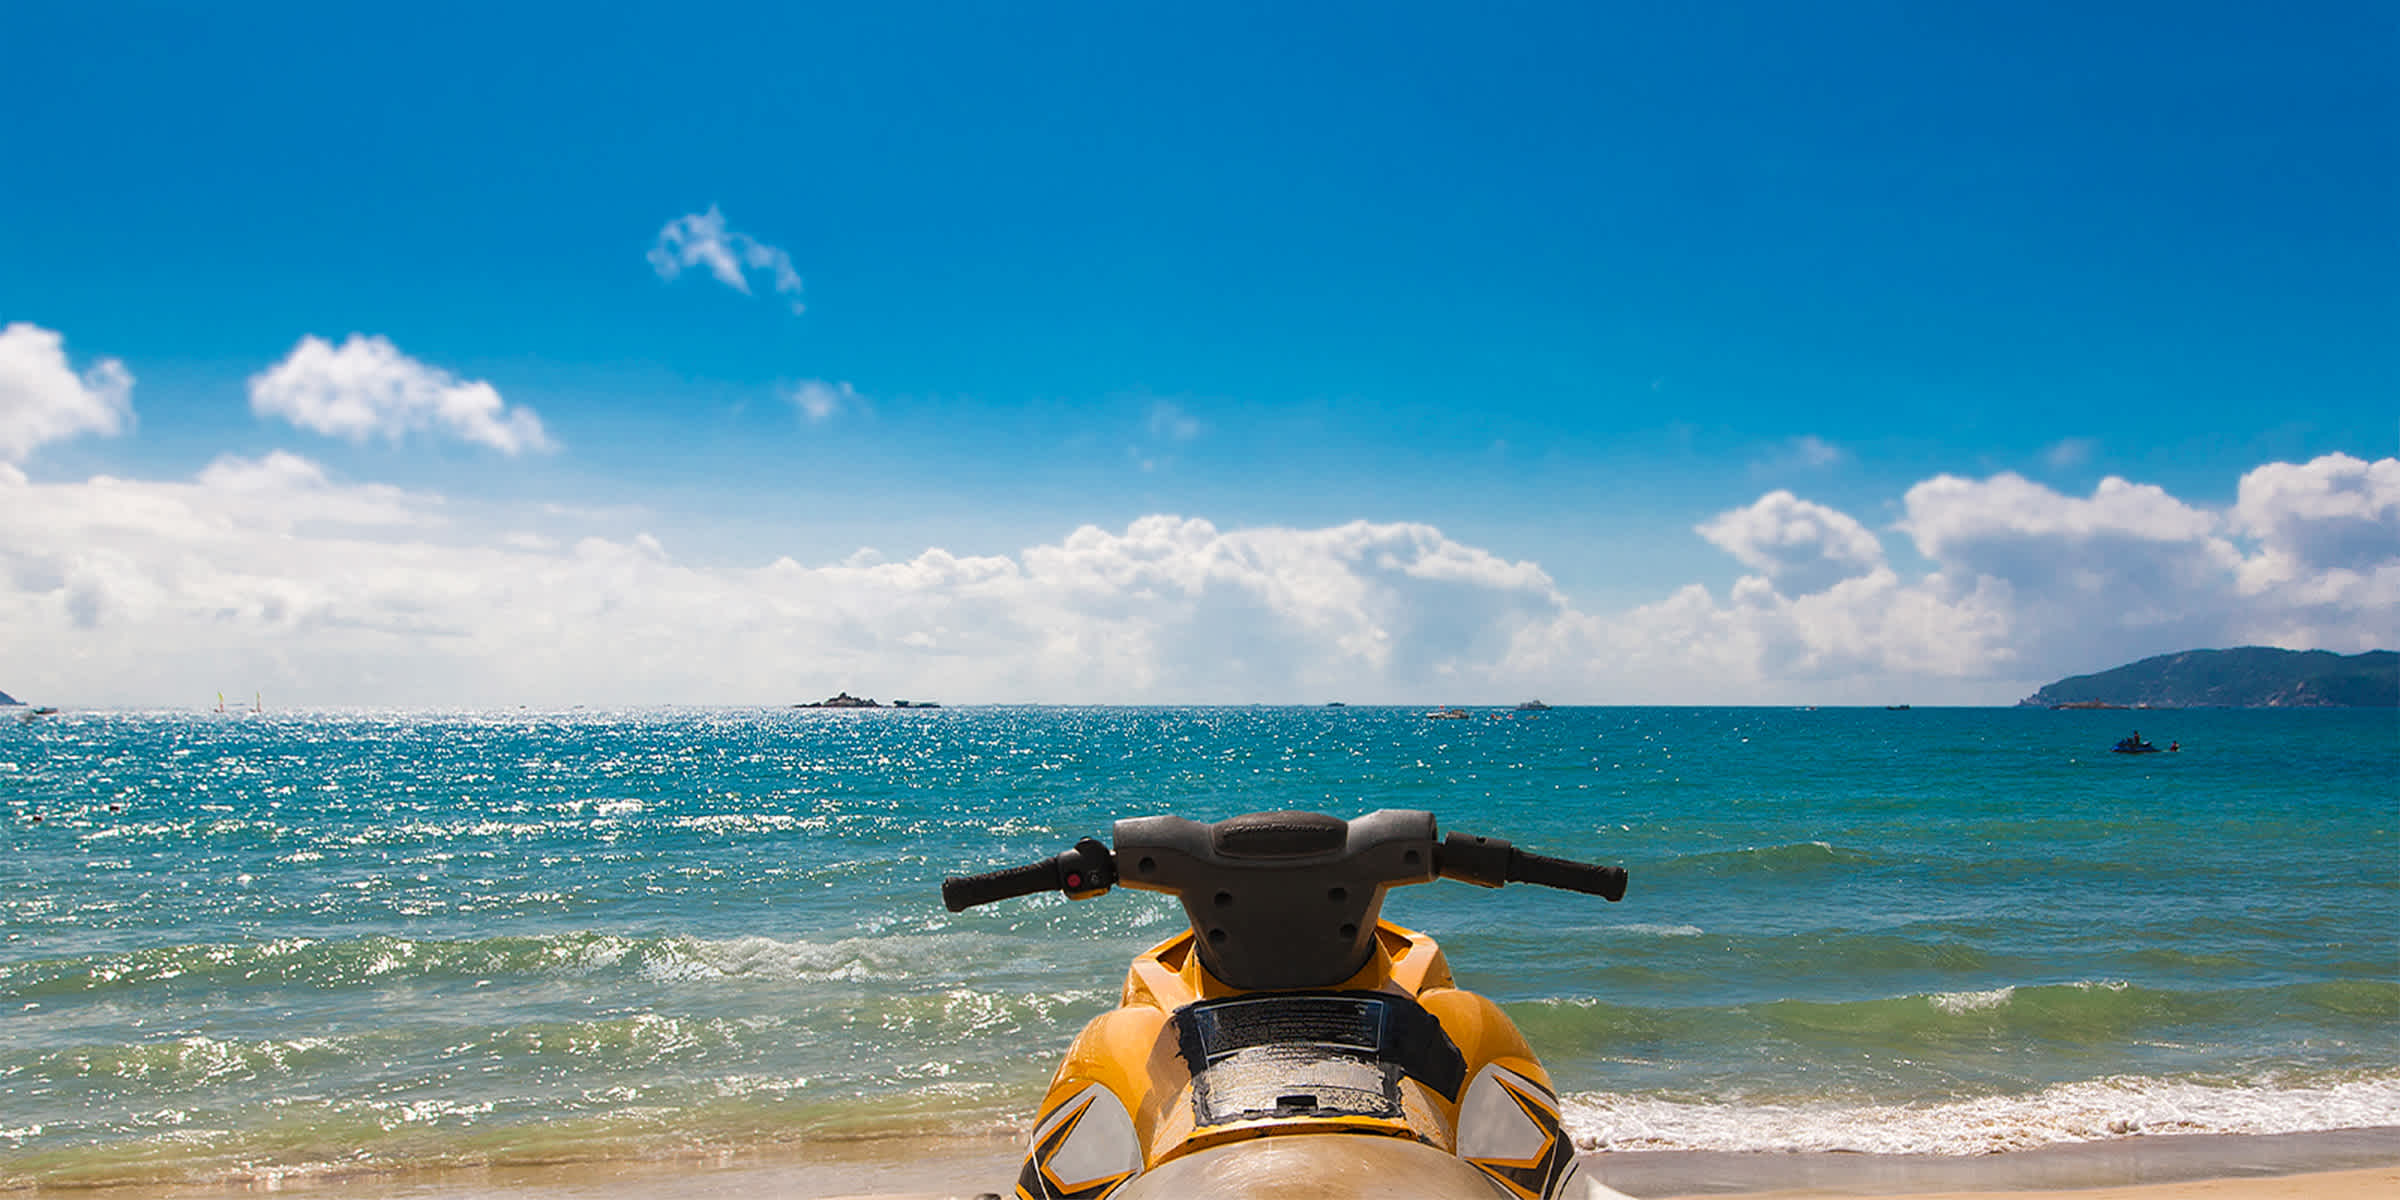 Image of a jetski on the Pacific ocean